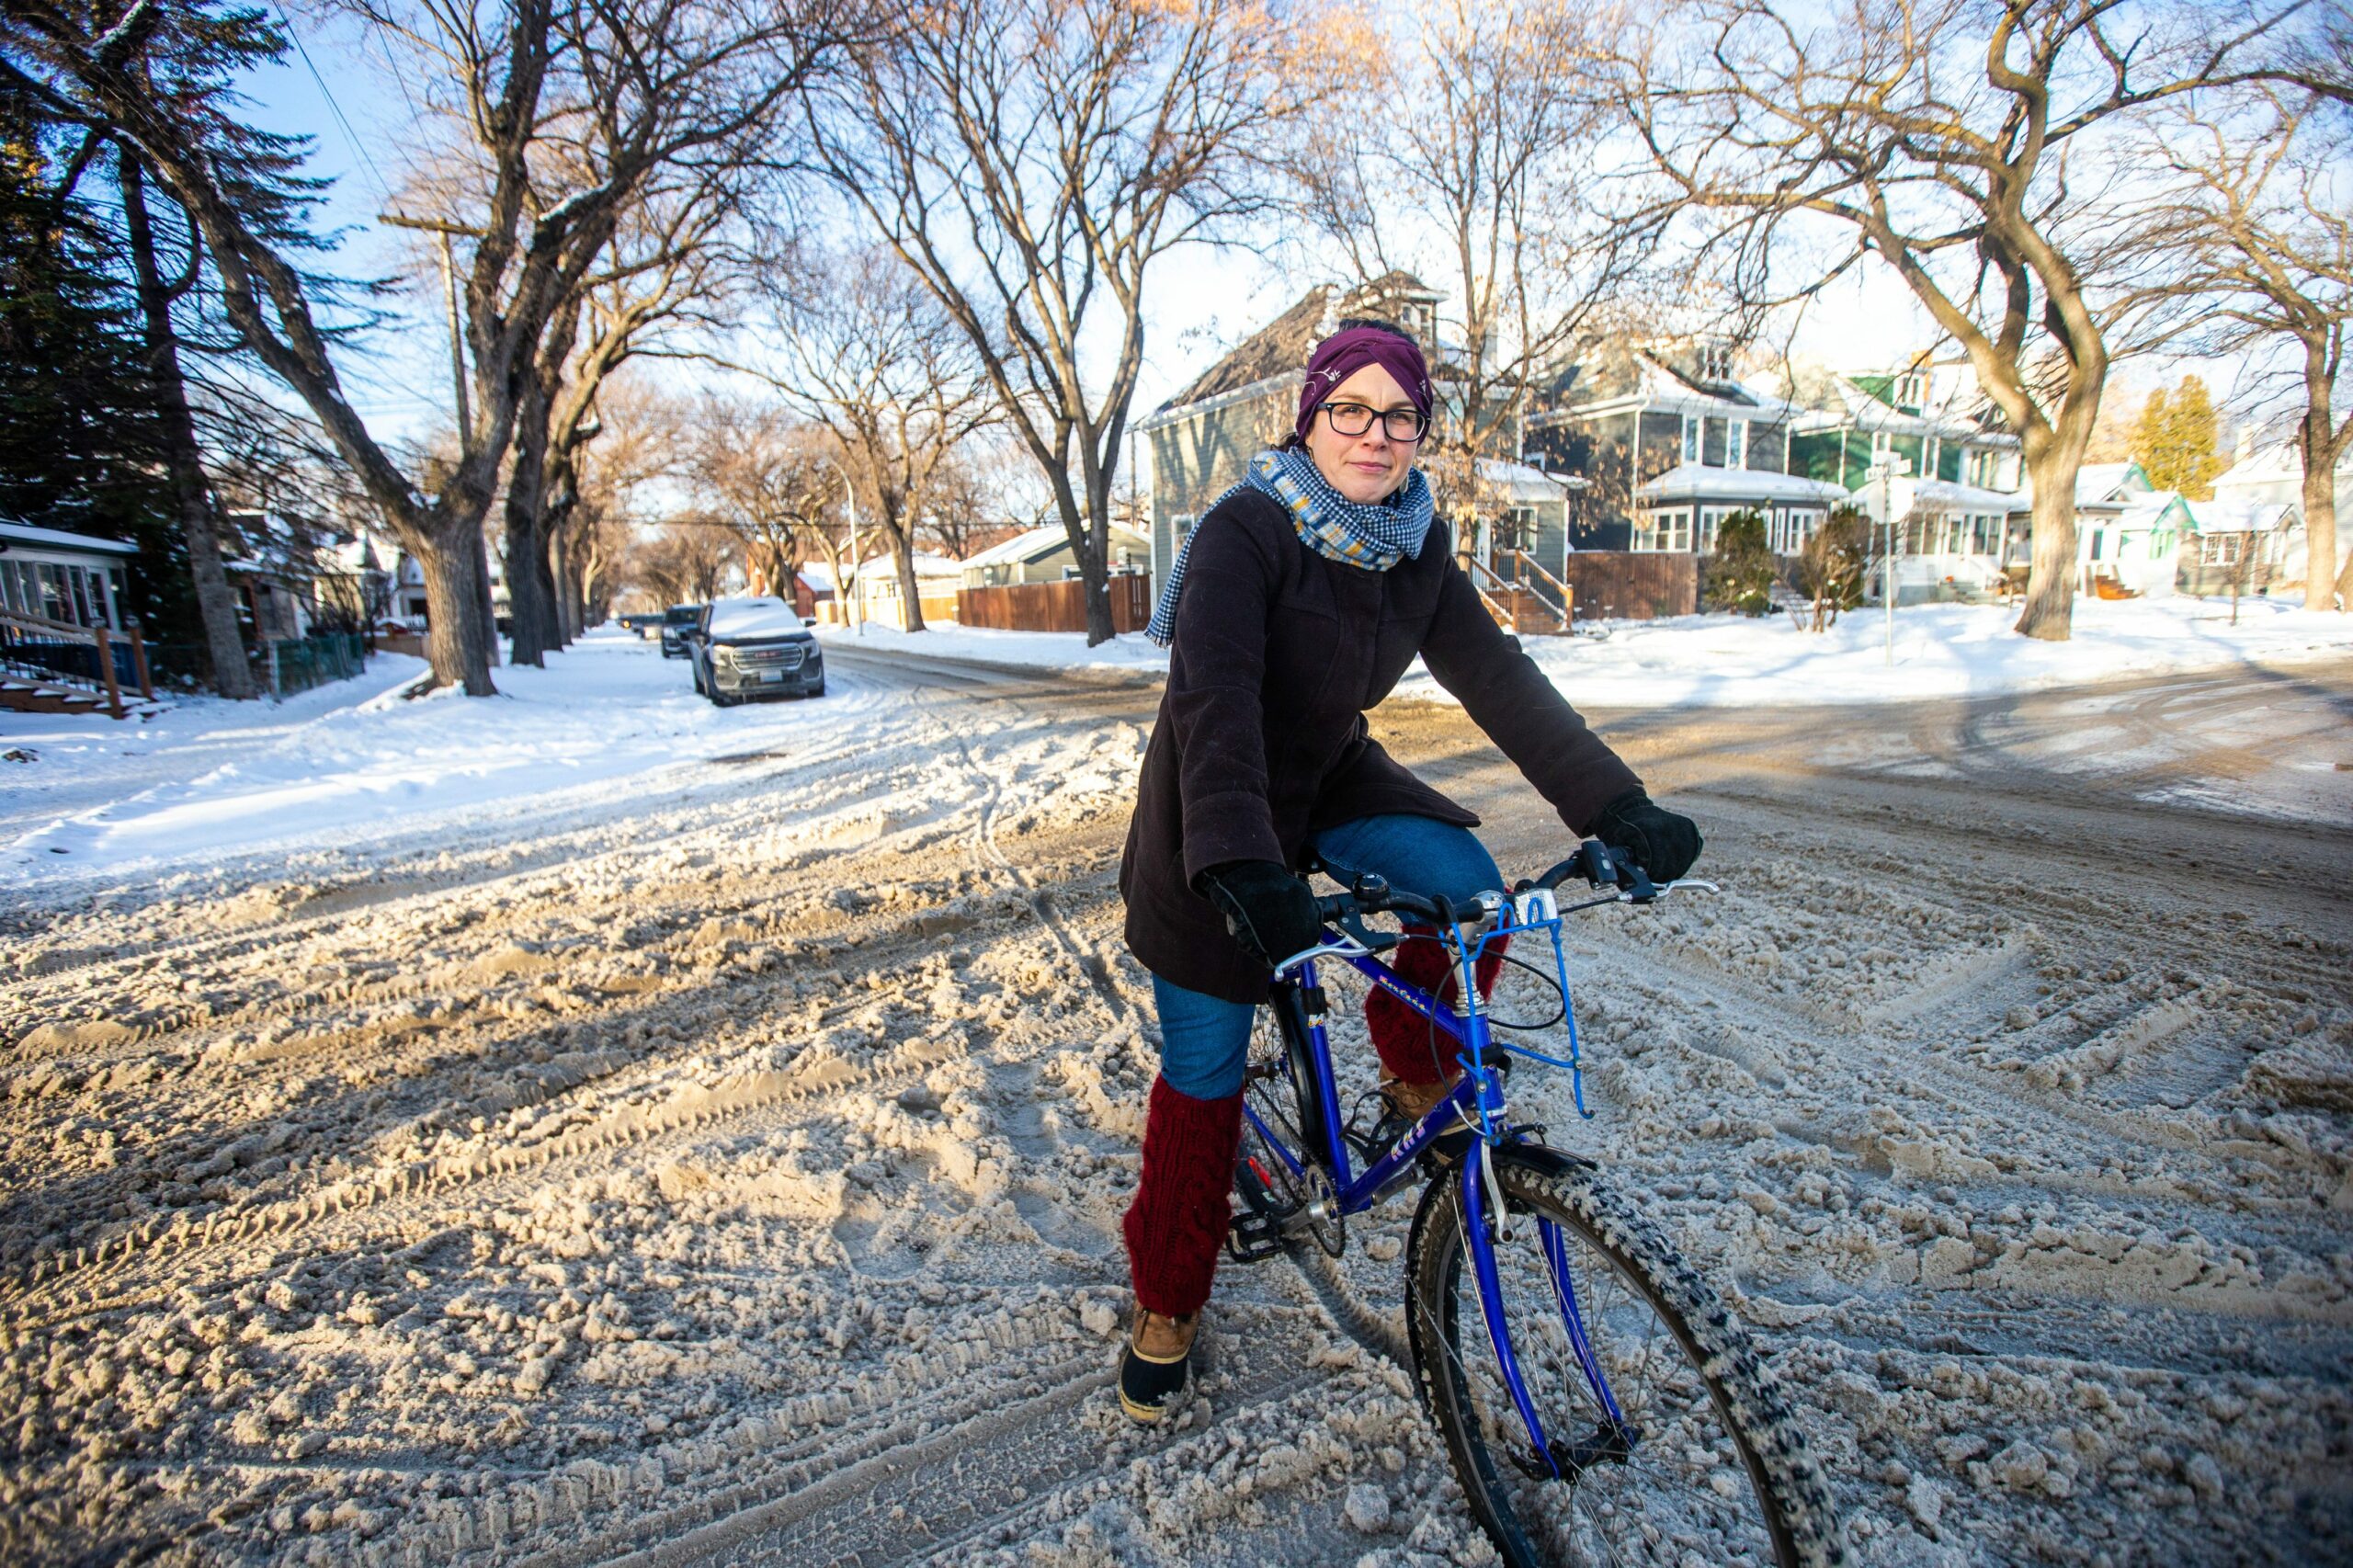 Mel Marginet with Manitoba's Green Action Centre sits on a blue bicycle in a snow-covered intersection in Winnipeg